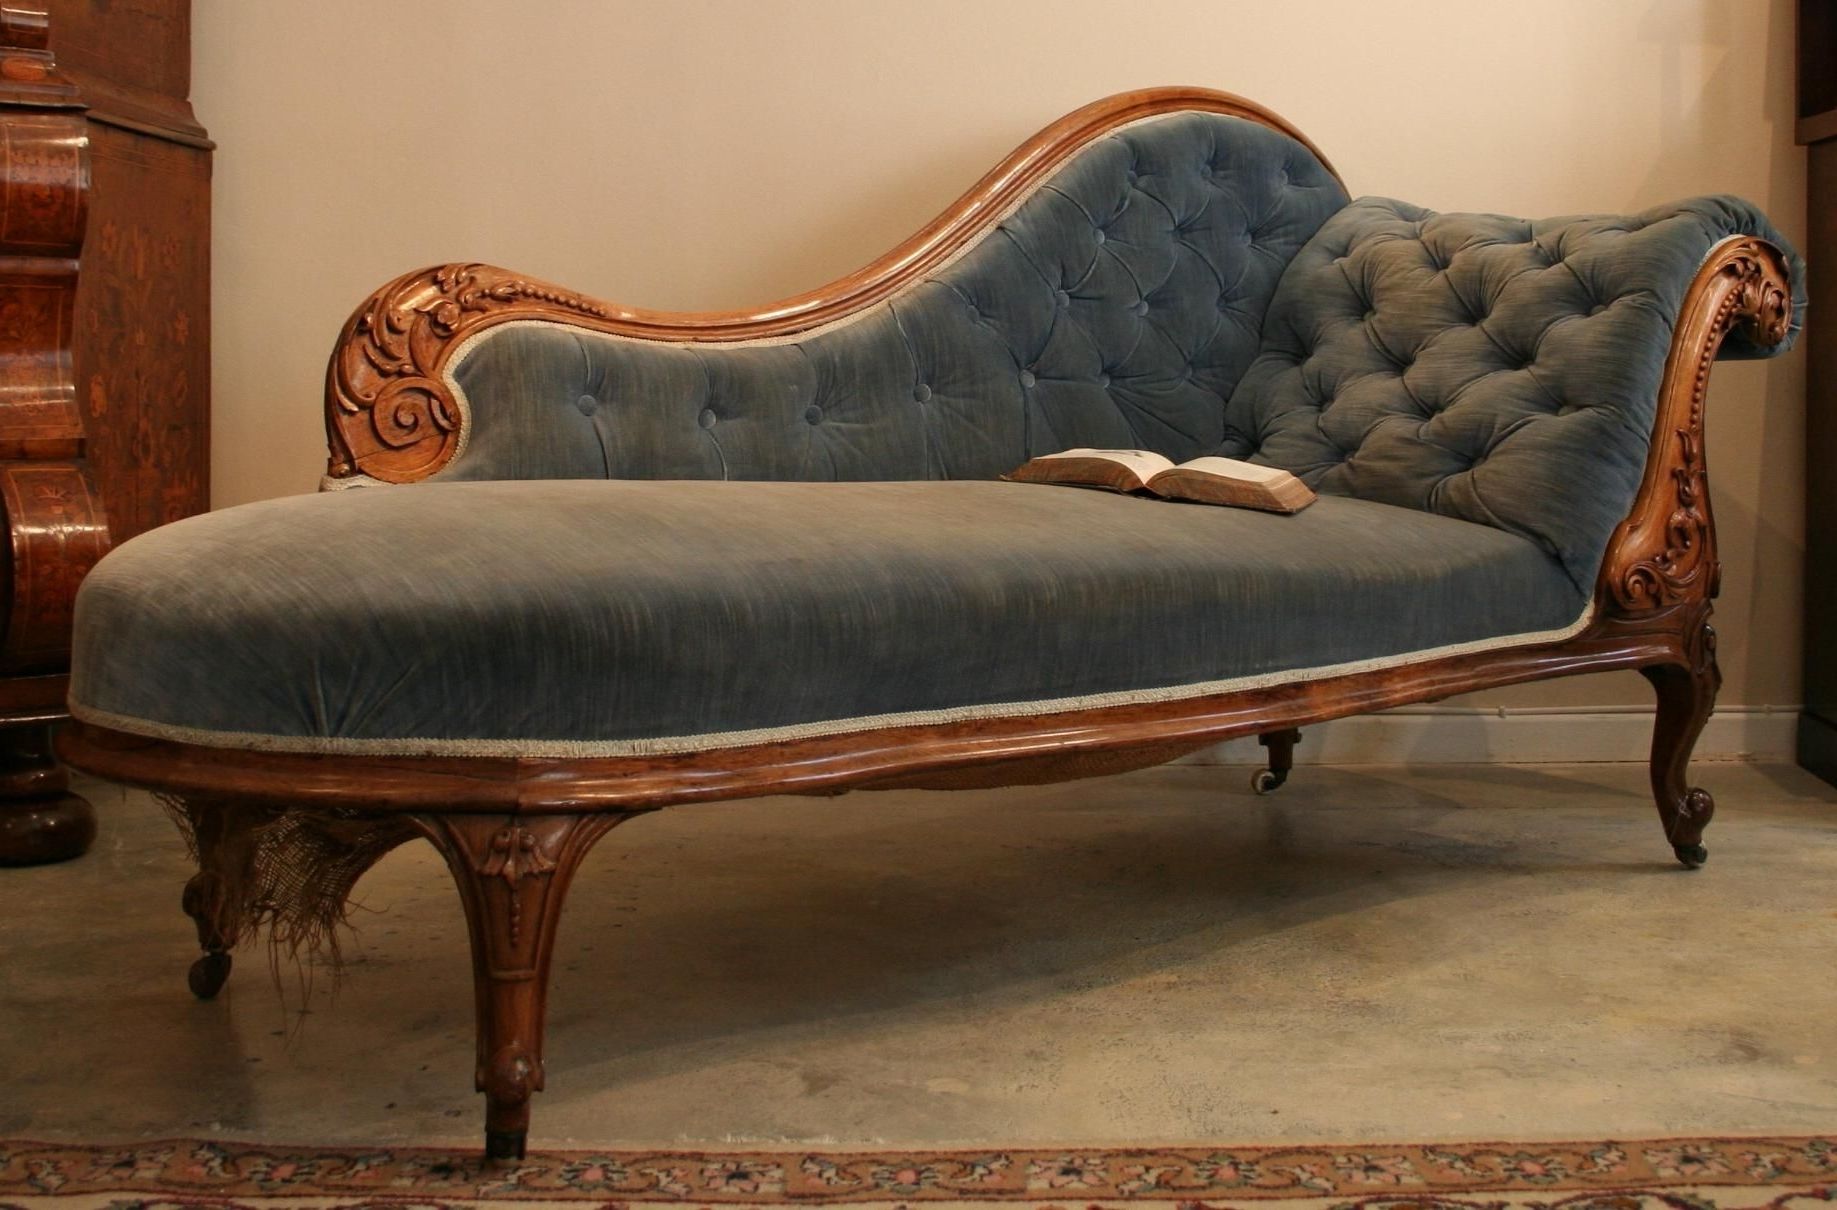 antique chaise lounge sofa bed